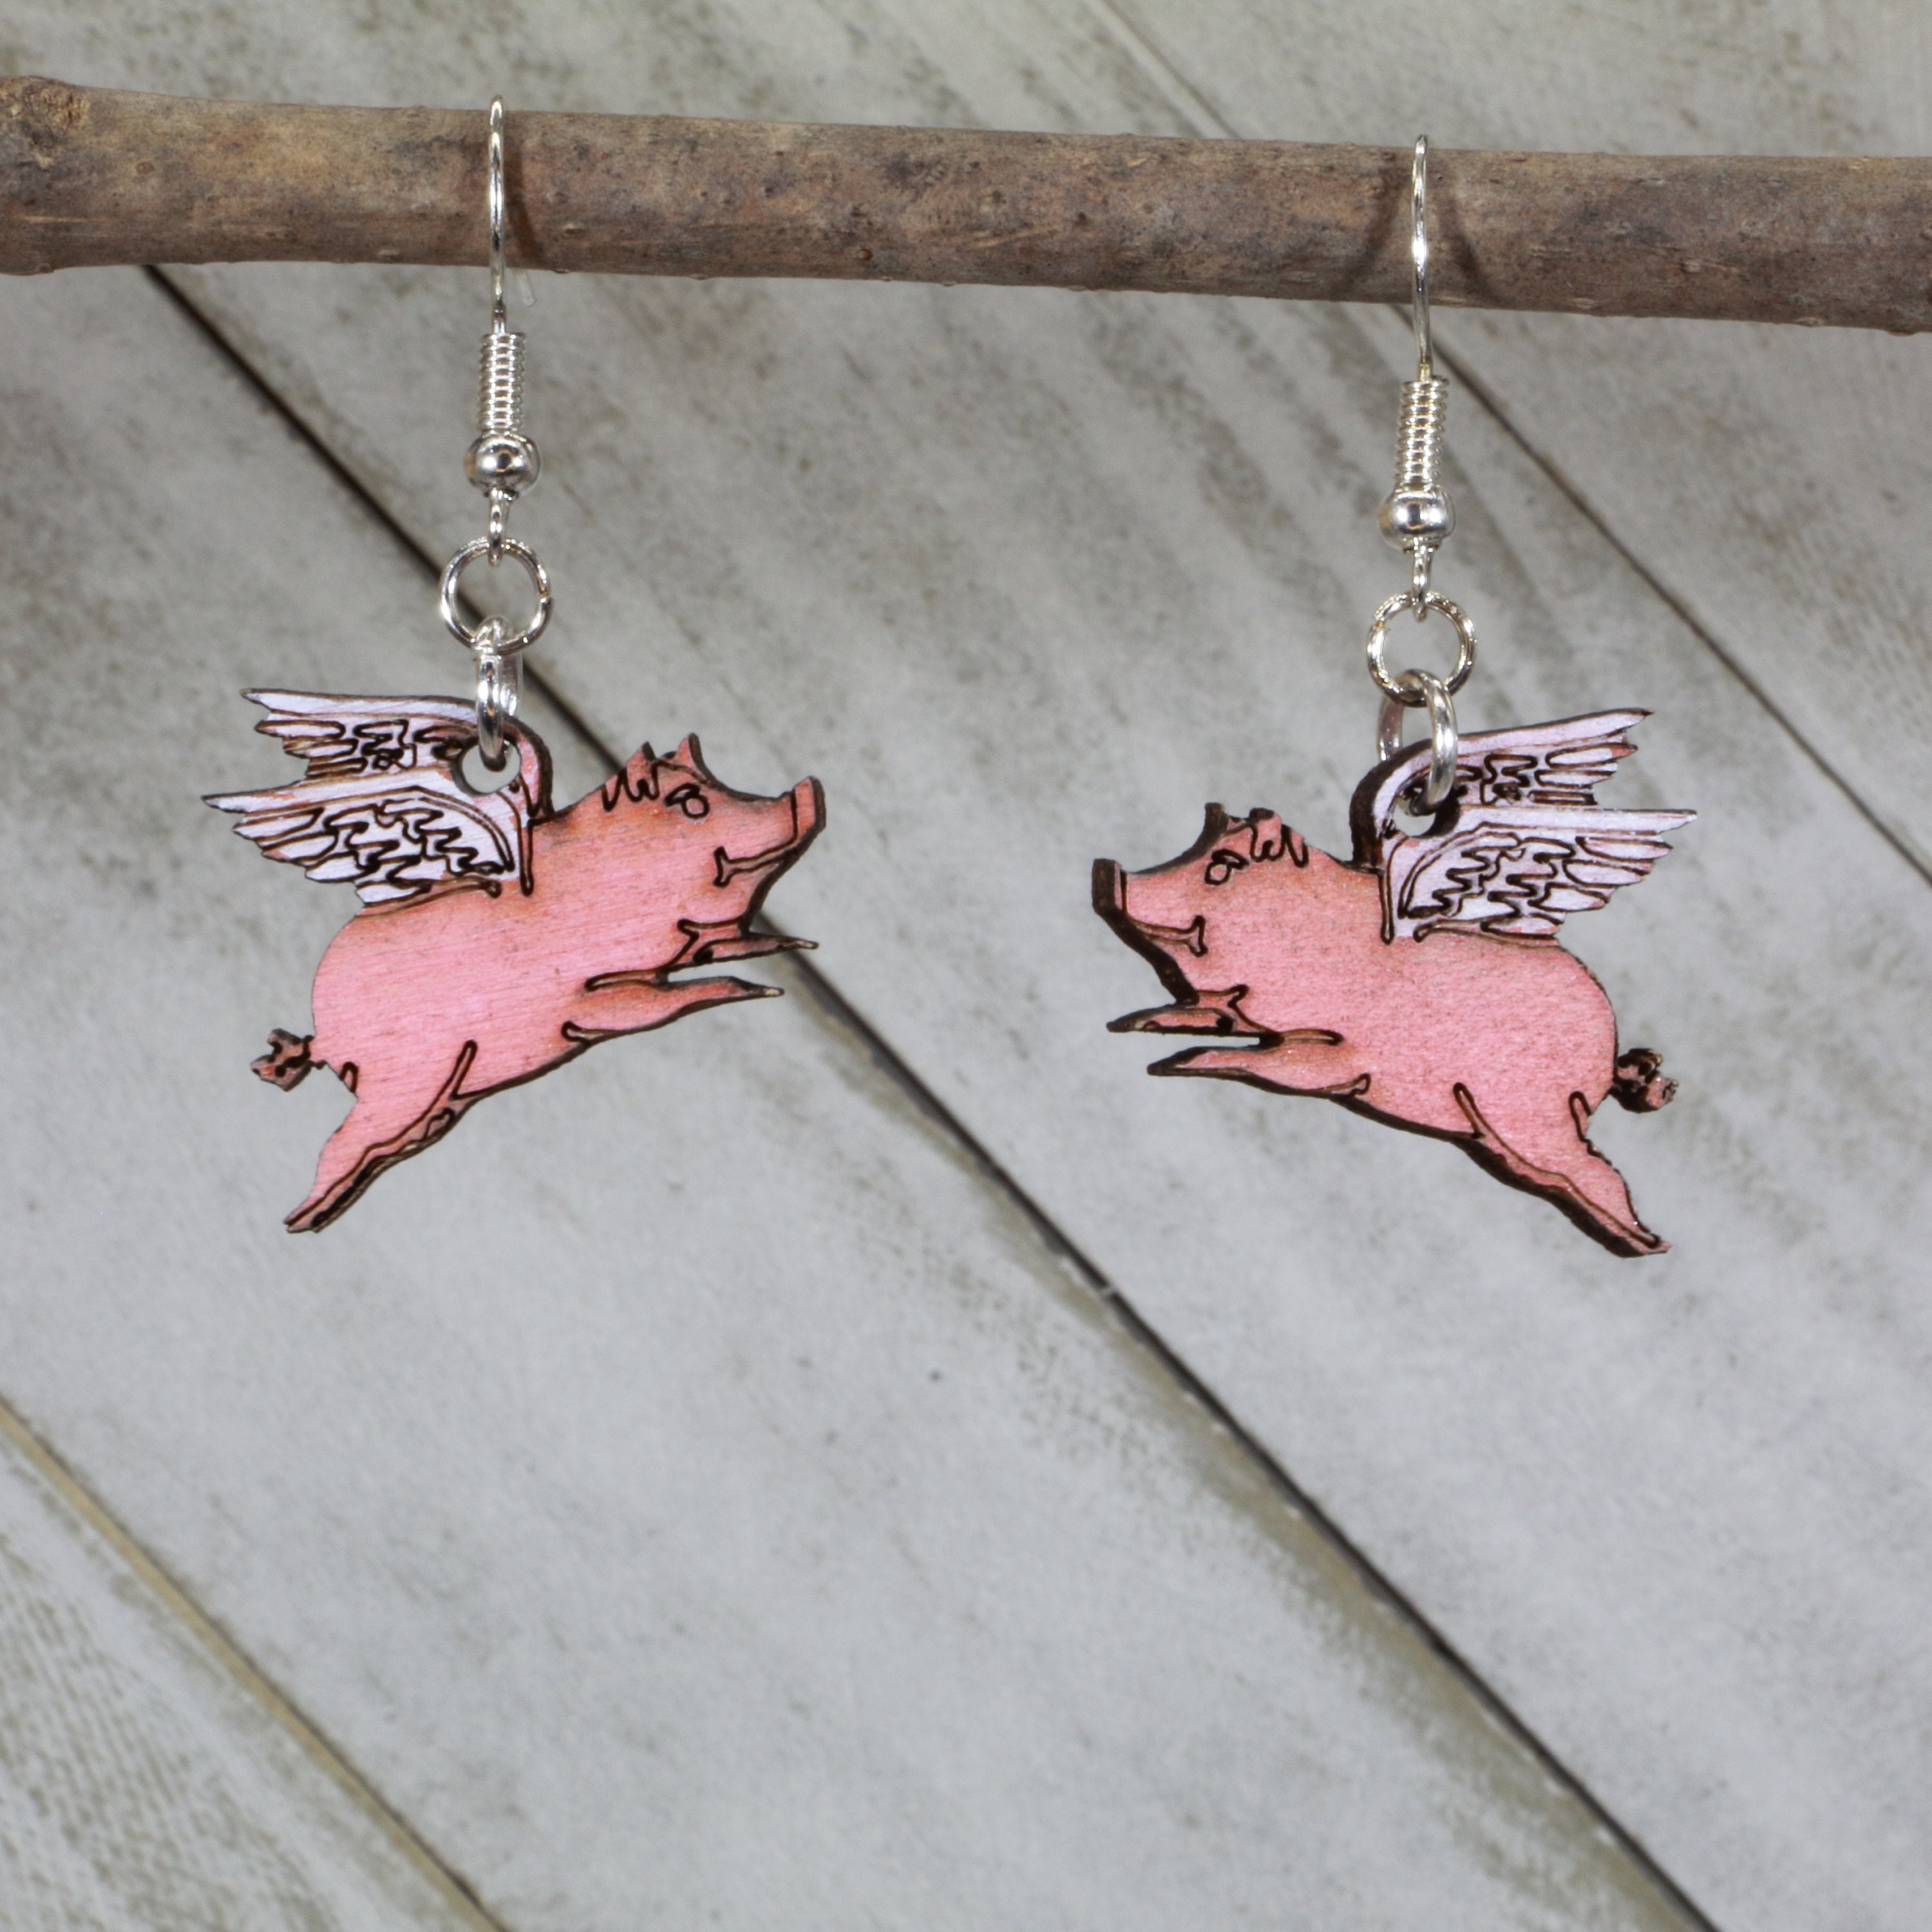 Buy Flying Pig Charm Online In India -  India